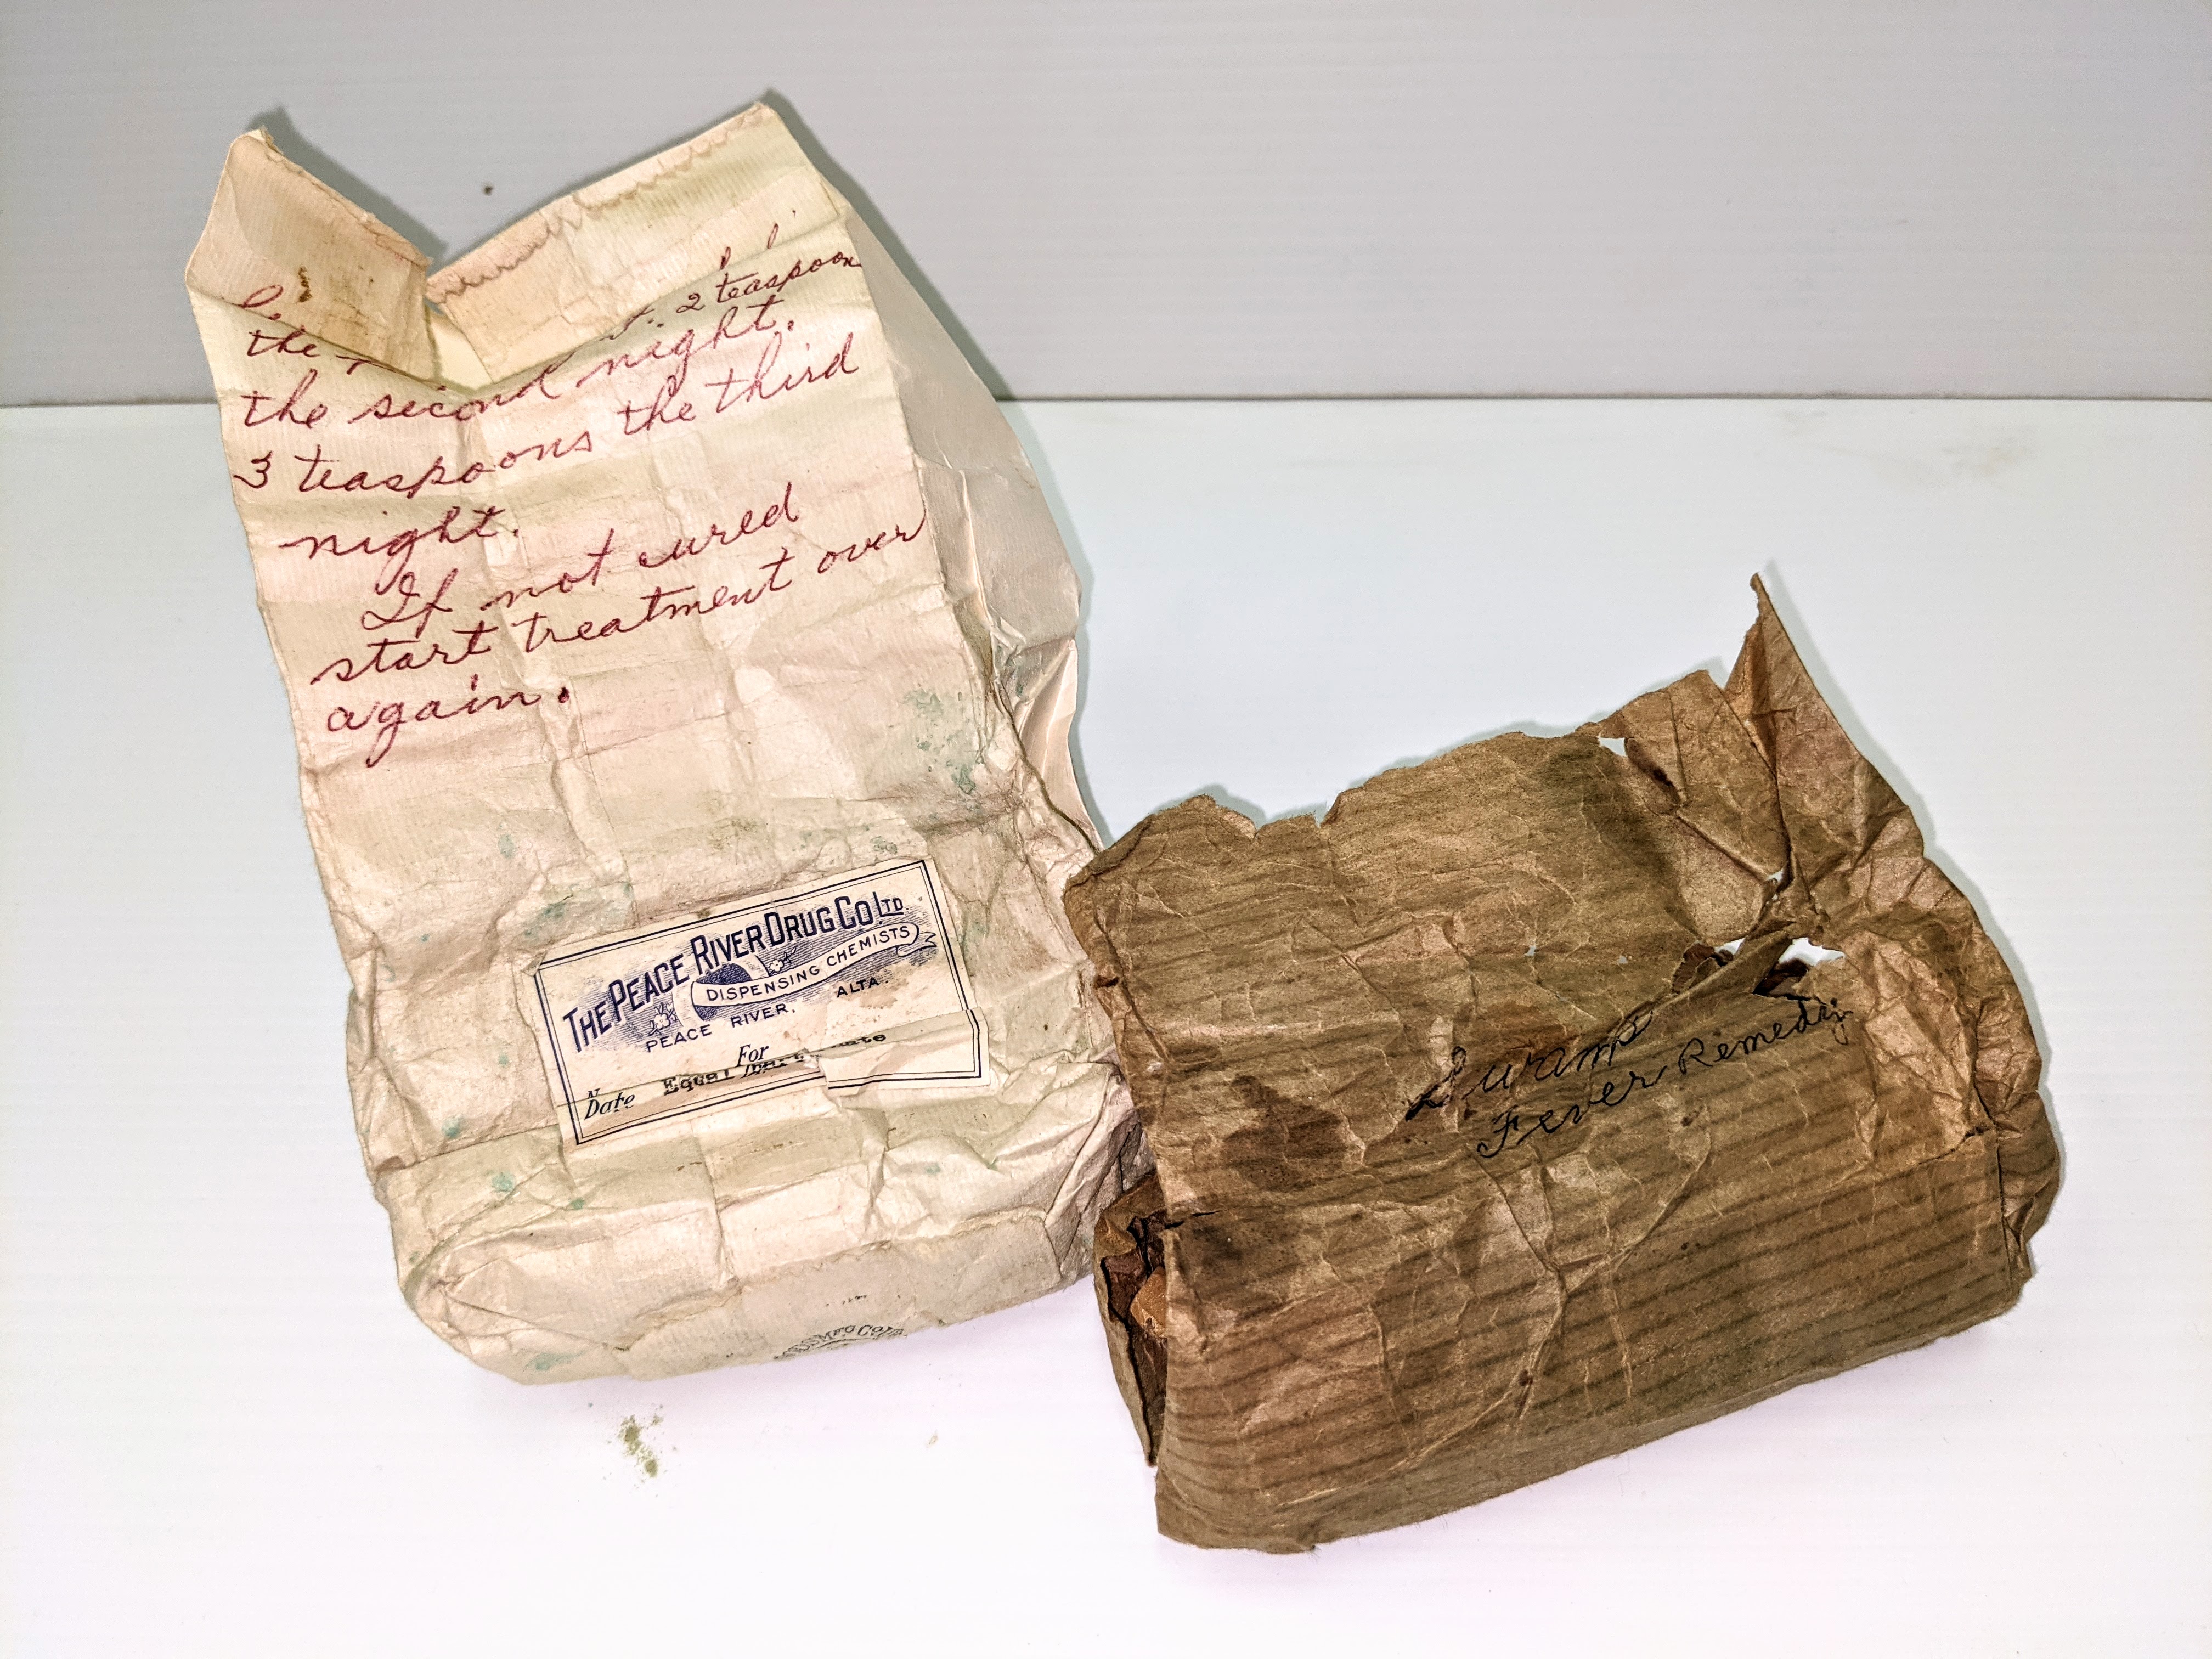 A product of the Peace River Drug Co. This bag contains a fine green powder labelled as "Saltpetre, resin, Borax, and copper sulfate". Scribbled on the brown packaging its use is labelled as "For Swamp Fever" while the red pen dictates the correct dosage. "1 teaspoon the first night, 2 teaspoon the second night, 3 teaspoon the third night. If not cured start treatment over again". Swamp fever is an ailment in horses that causes lethargy, muscle atrophy and anemia - not ideal for indigenous folks and pioneers who relied on horses for transport and heavy work!

14/06/2021
2000.03.54 / Cambell, Jean